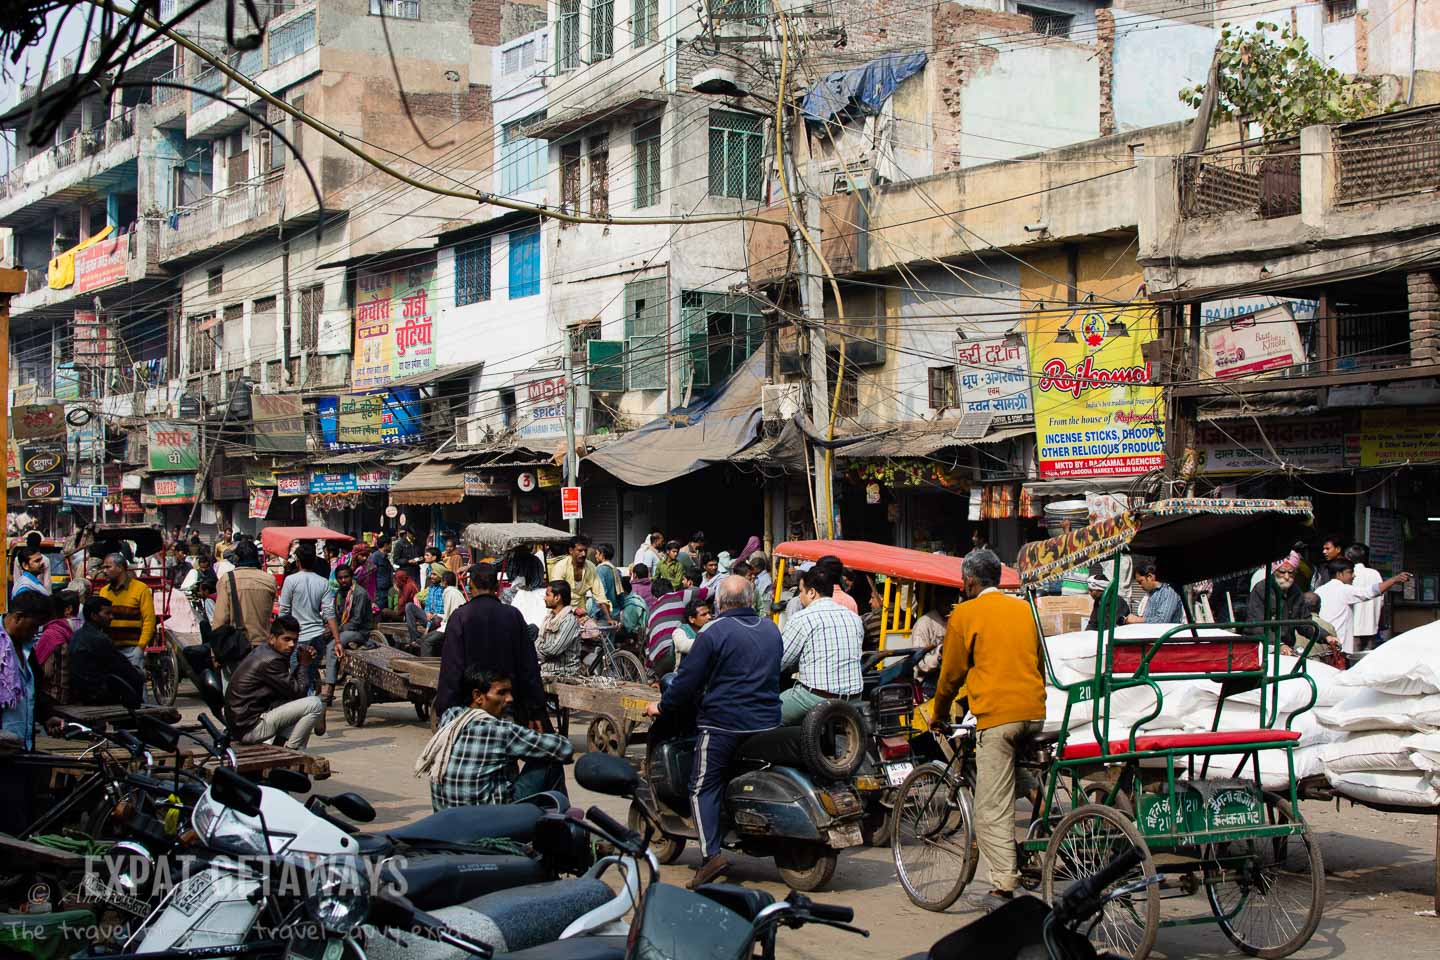 The streets of Delhi are chaotic! Expat Getaways, 5 Nights Golden Triangle, Delhi, Jaipur & Agra, India.